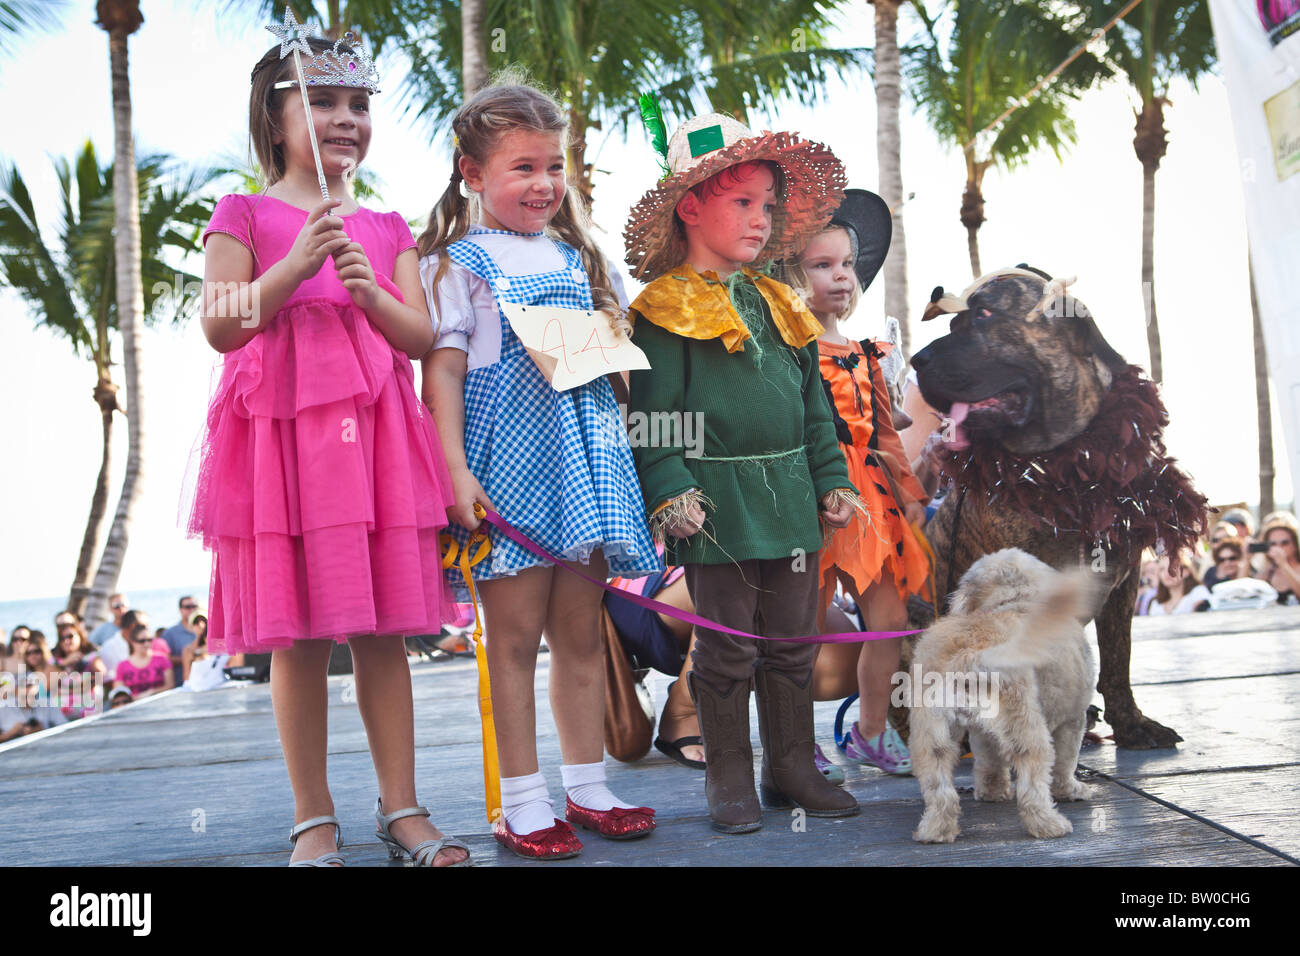 Costumed children participate in the Pet Masquerade at the annual Fantasy Fest Key West, Florida. Stock Photo